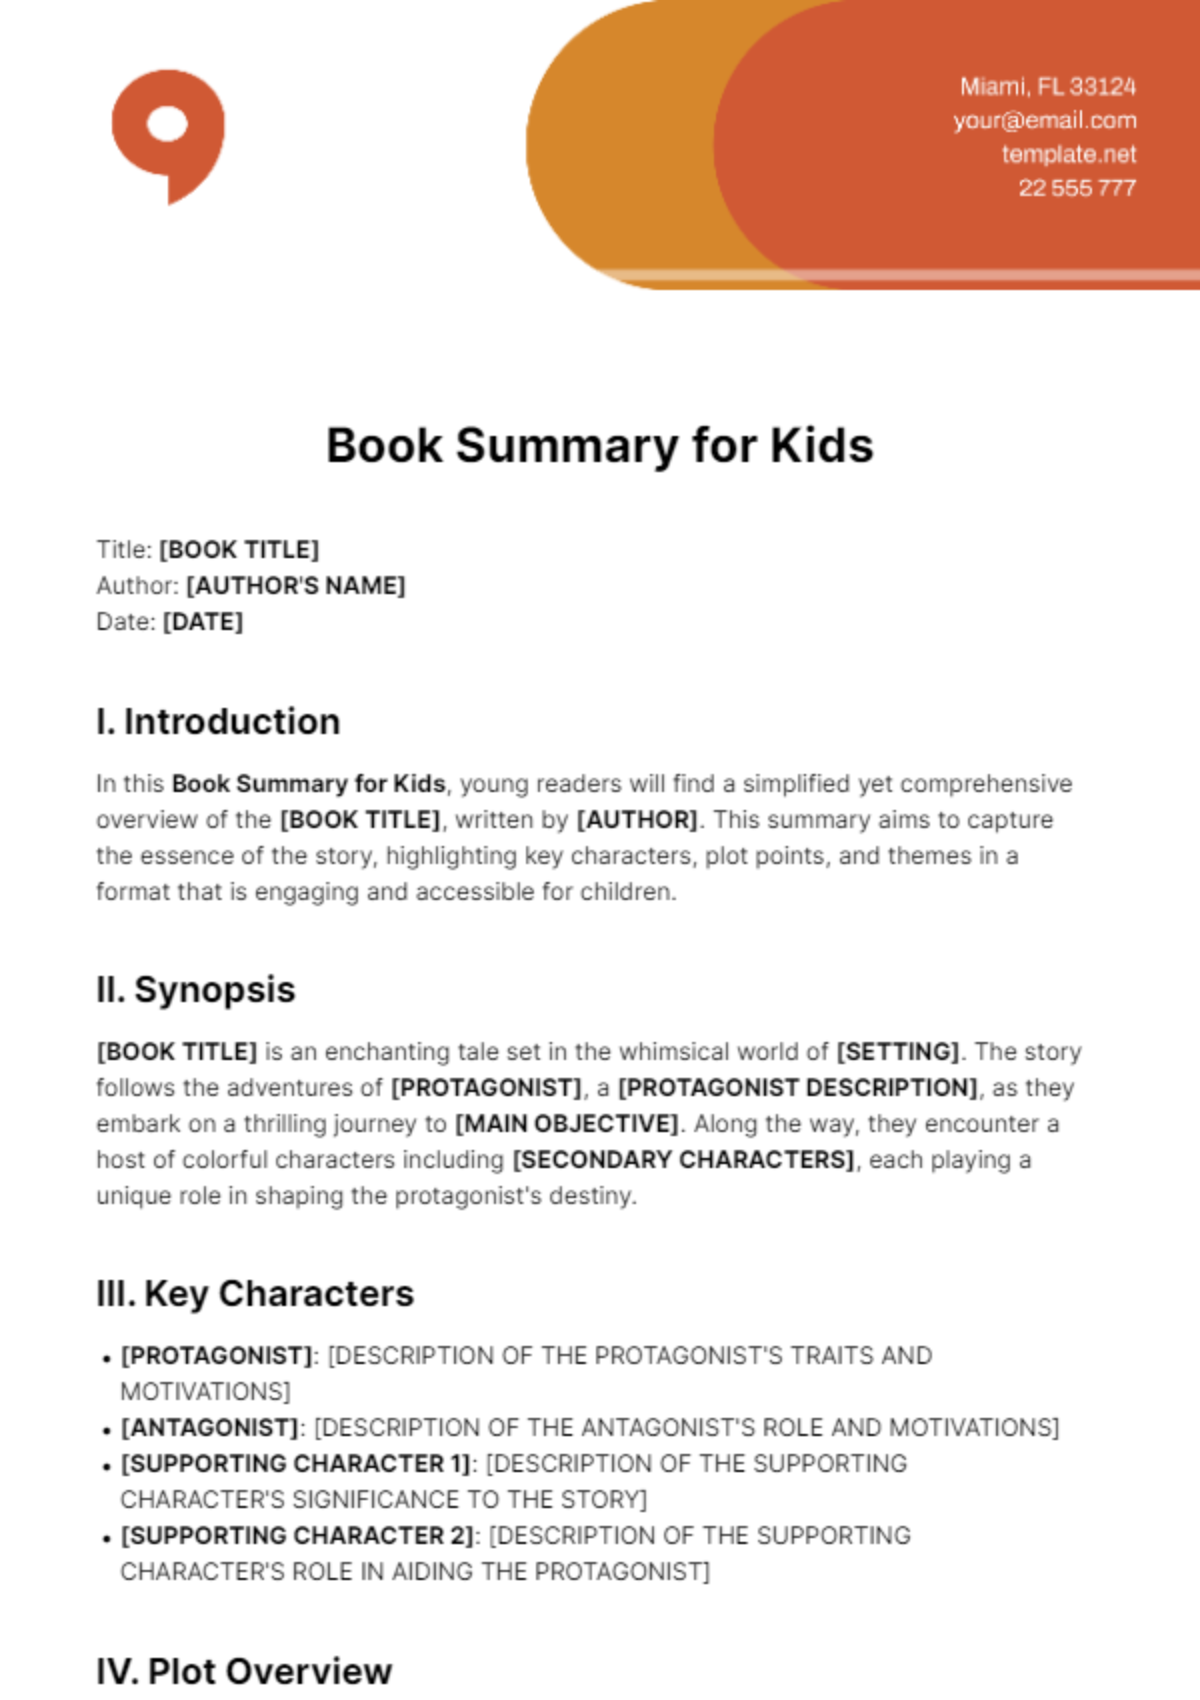 Book Summary for Kids Template